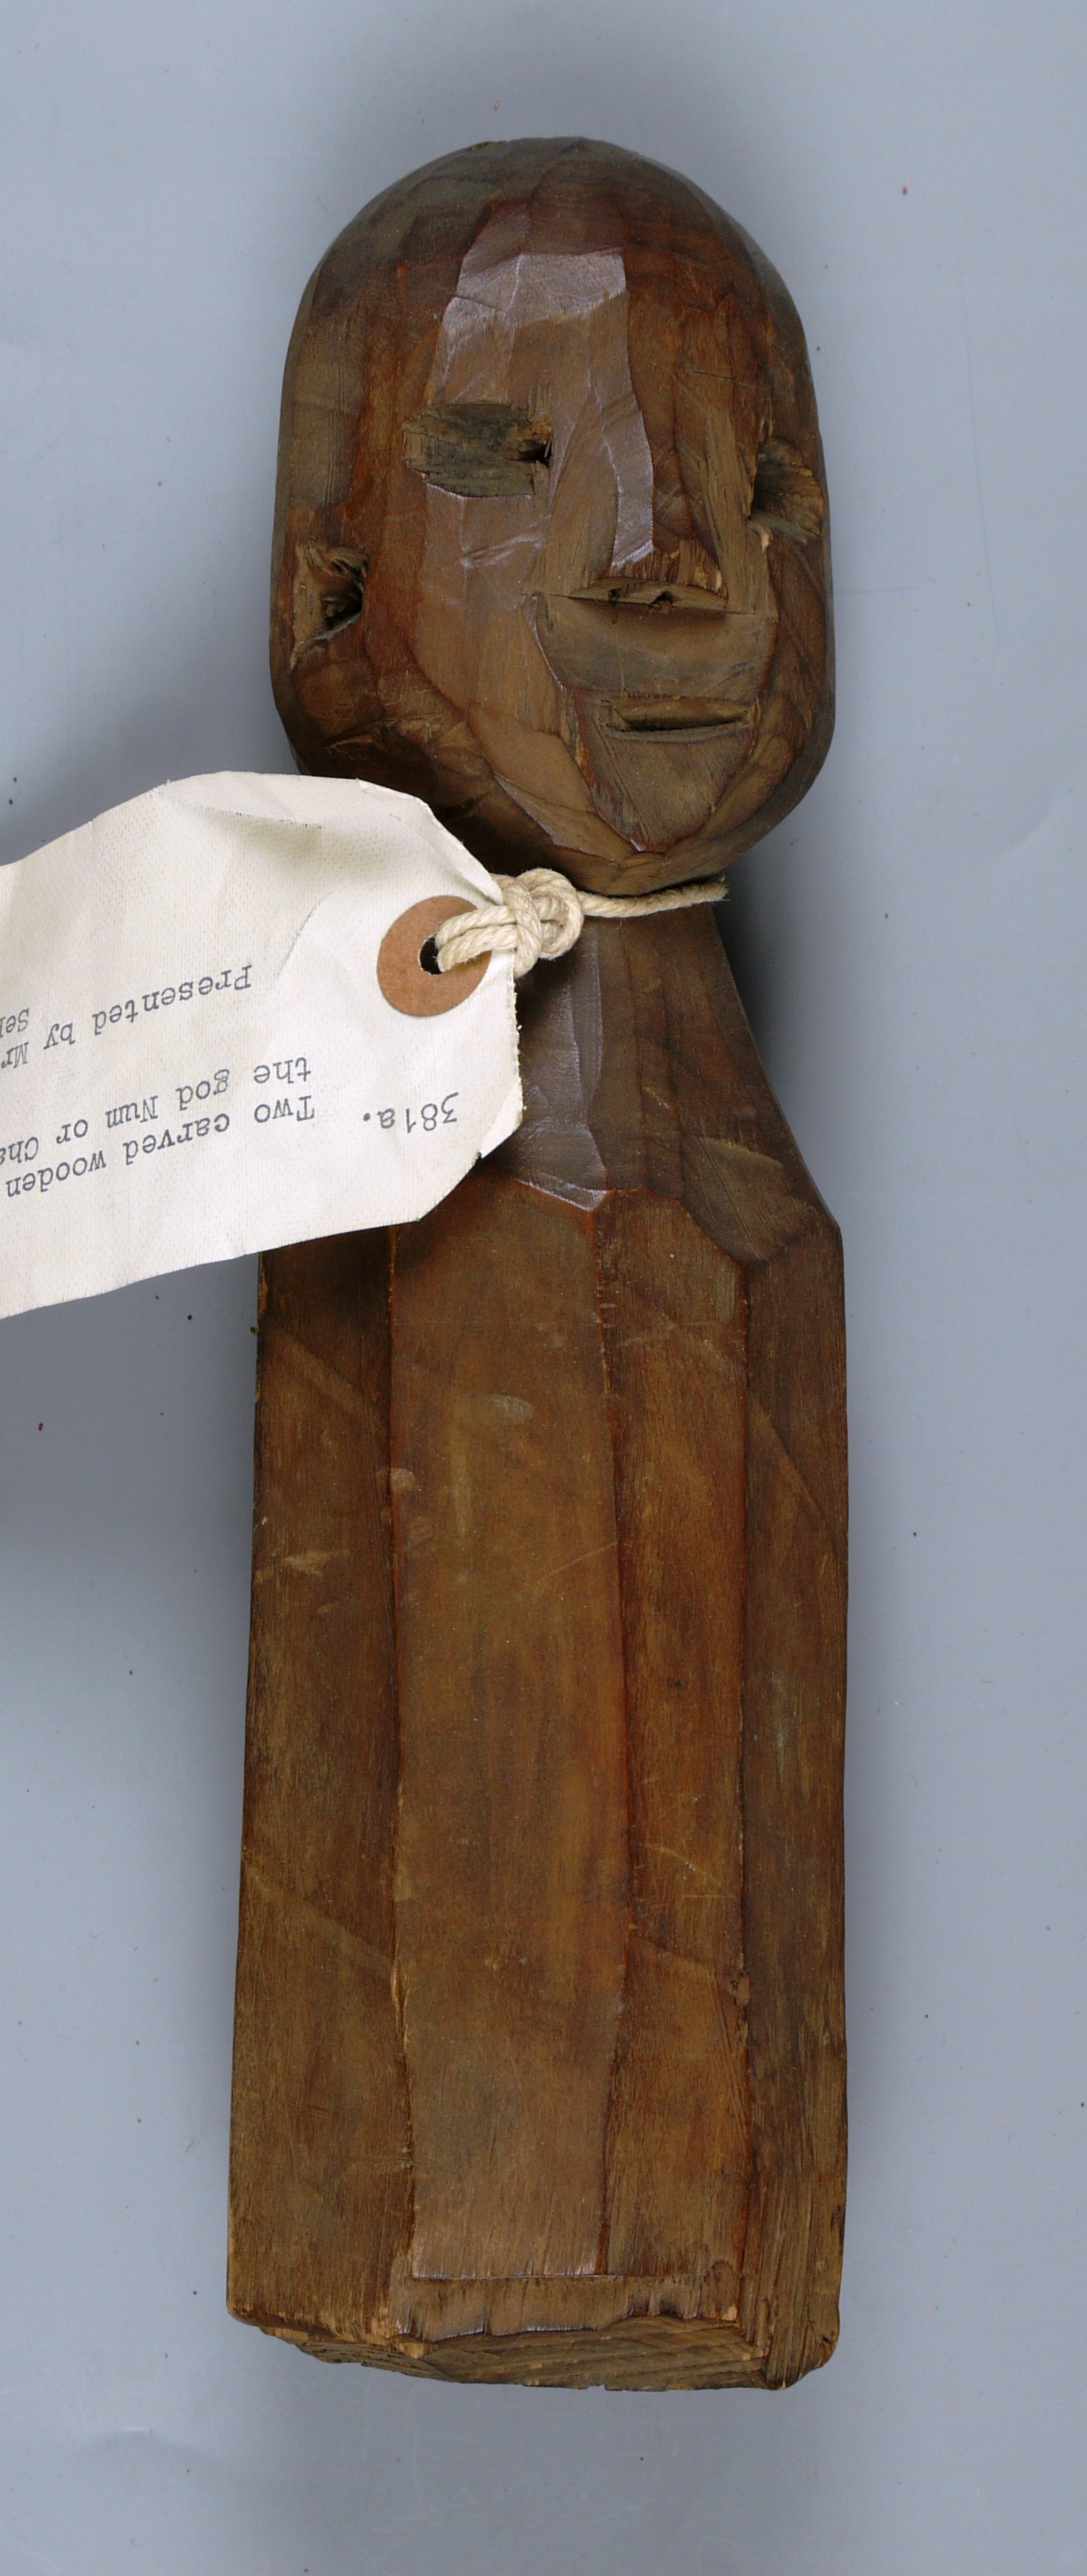 carved, human figure made of wood with a label tied around its neck